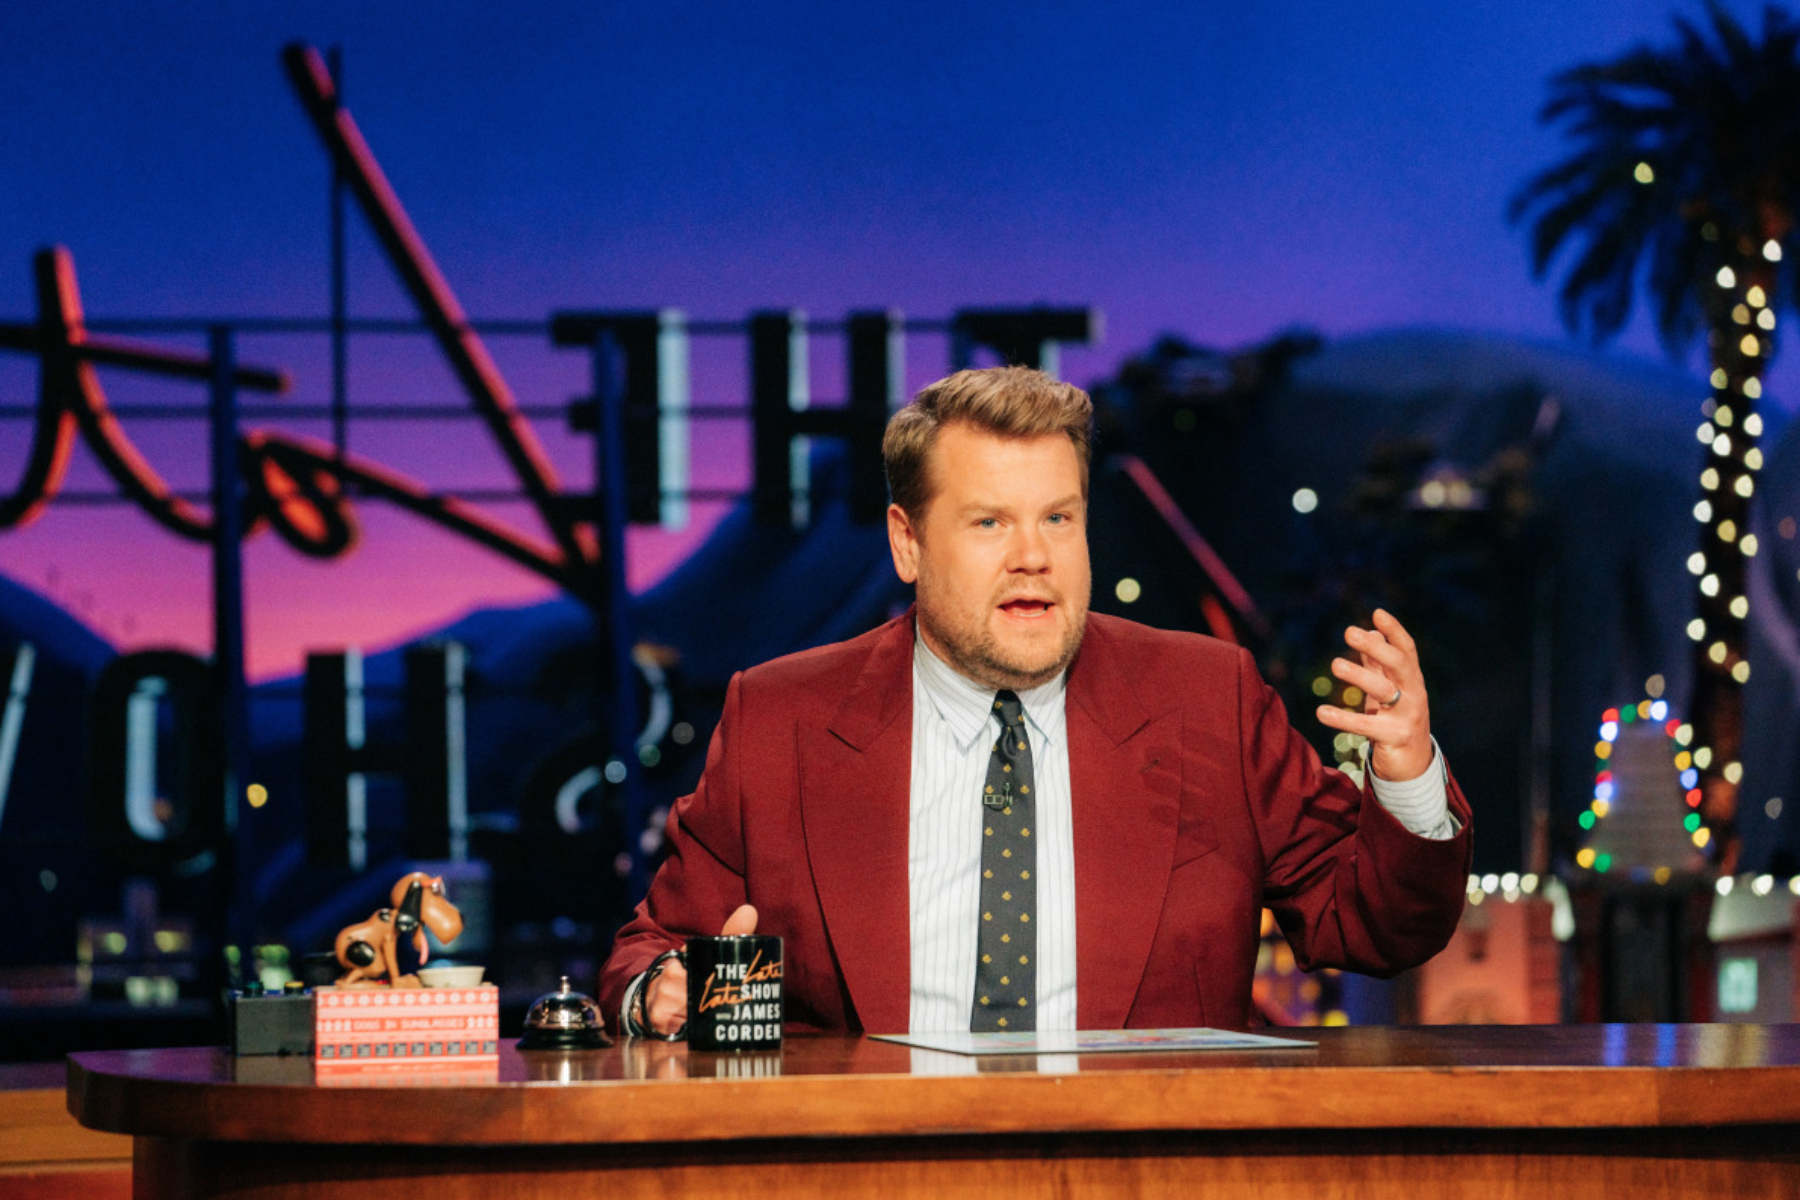 James Corden Cancels Upcoming ‘Late Late Show’ Episodes After Covid Diagnosis